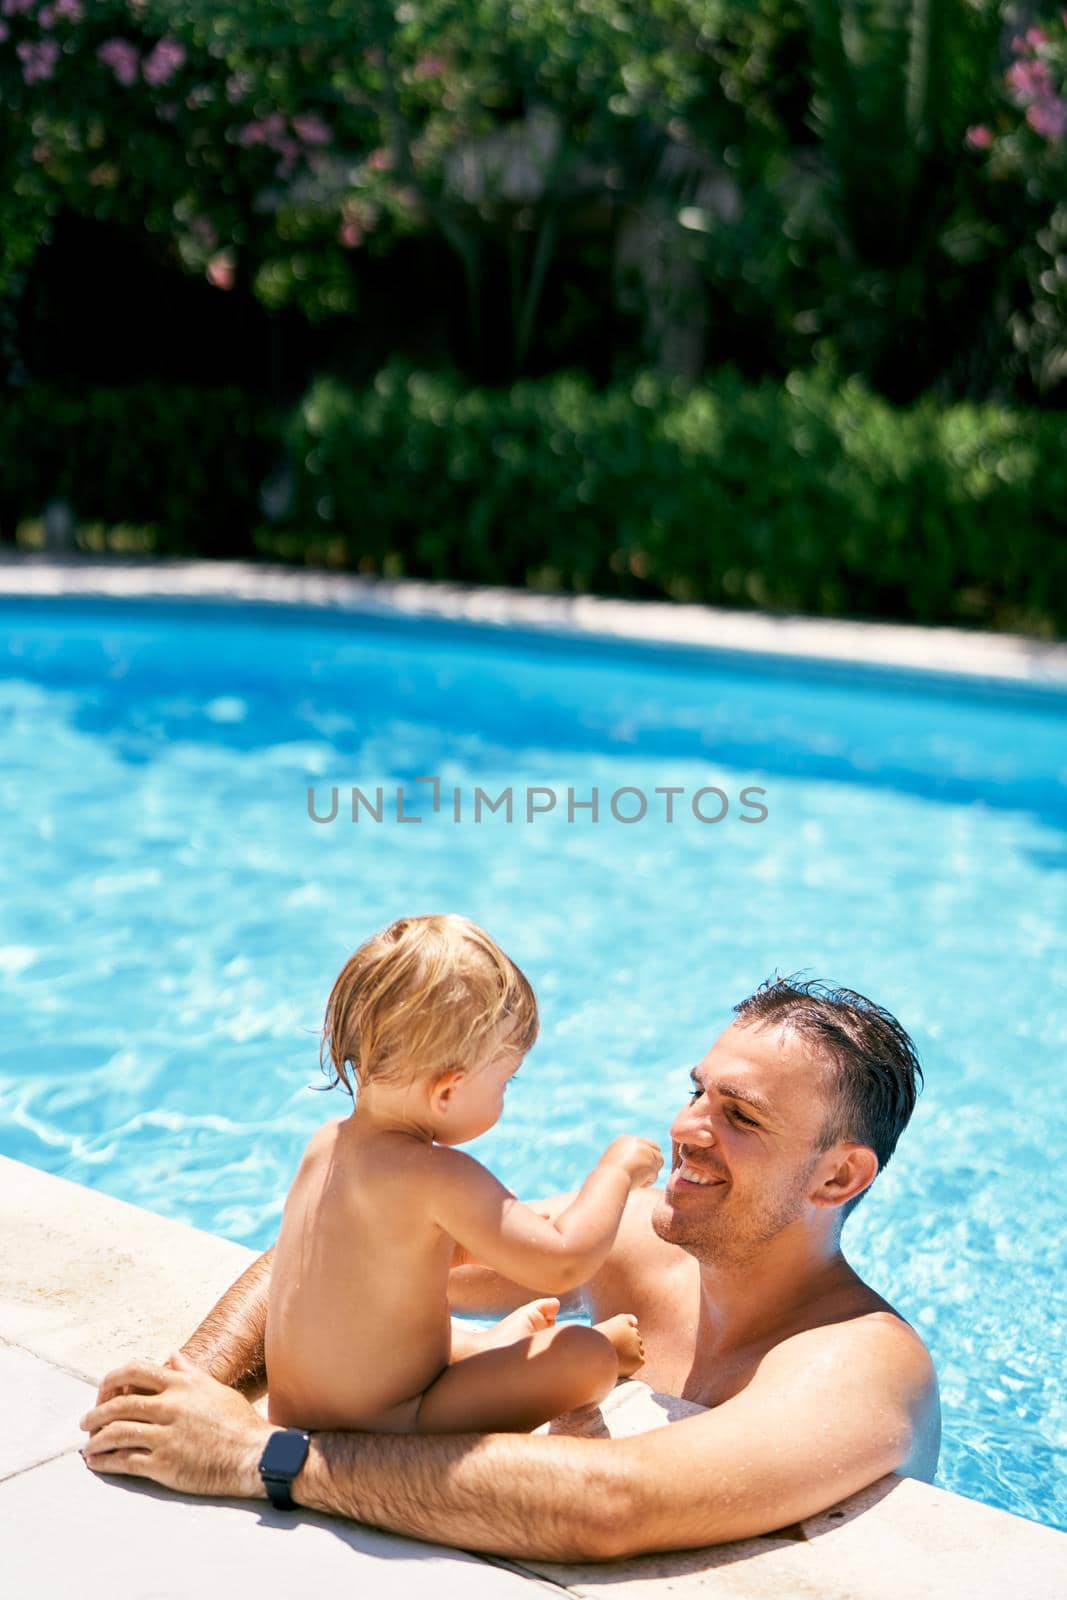 Smiling dad stands in the water and hugs a small child sitting on the edge of the pool. High quality photo